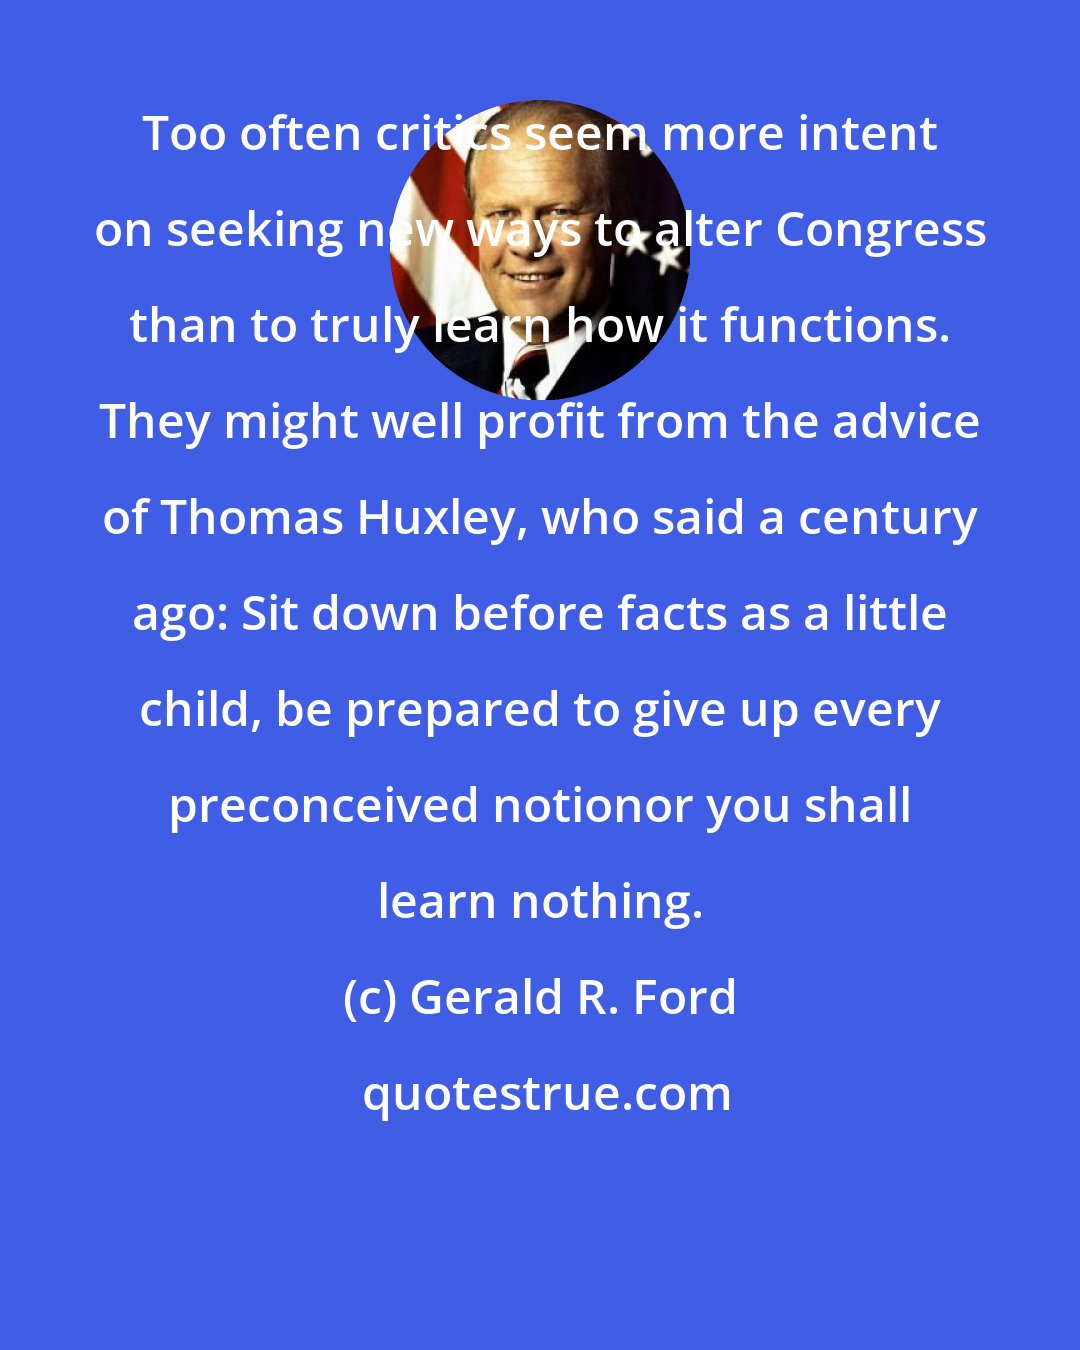 Gerald R. Ford: Too often critics seem more intent on seeking new ways to alter Congress than to truly learn how it functions. They might well profit from the advice of Thomas Huxley, who said a century ago: Sit down before facts as a little child, be prepared to give up every preconceived notionor you shall learn nothing.